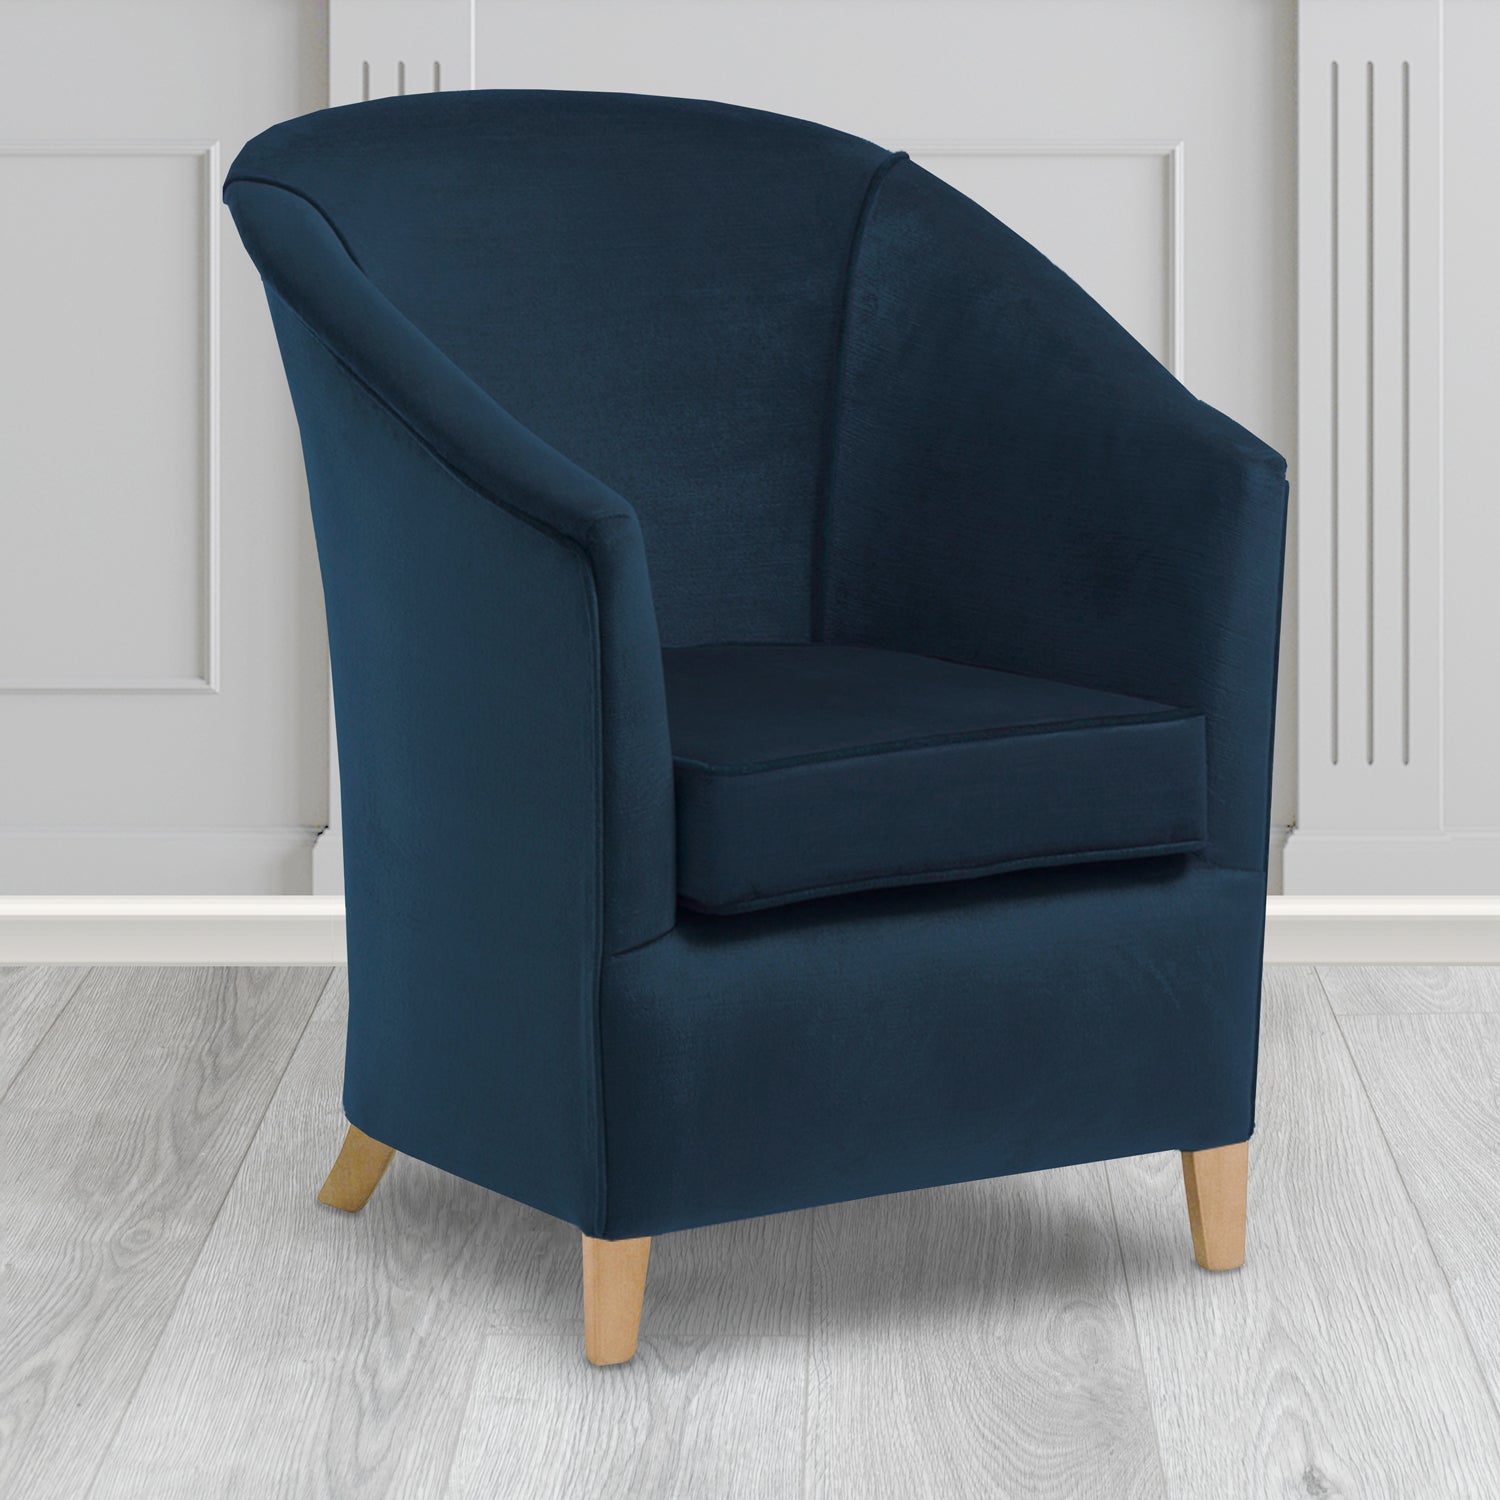 Bolton Tub Chair in Noble 192 Ink Crib 5 Velvet Fabric - Water Resistant - The Tub Chair Shop